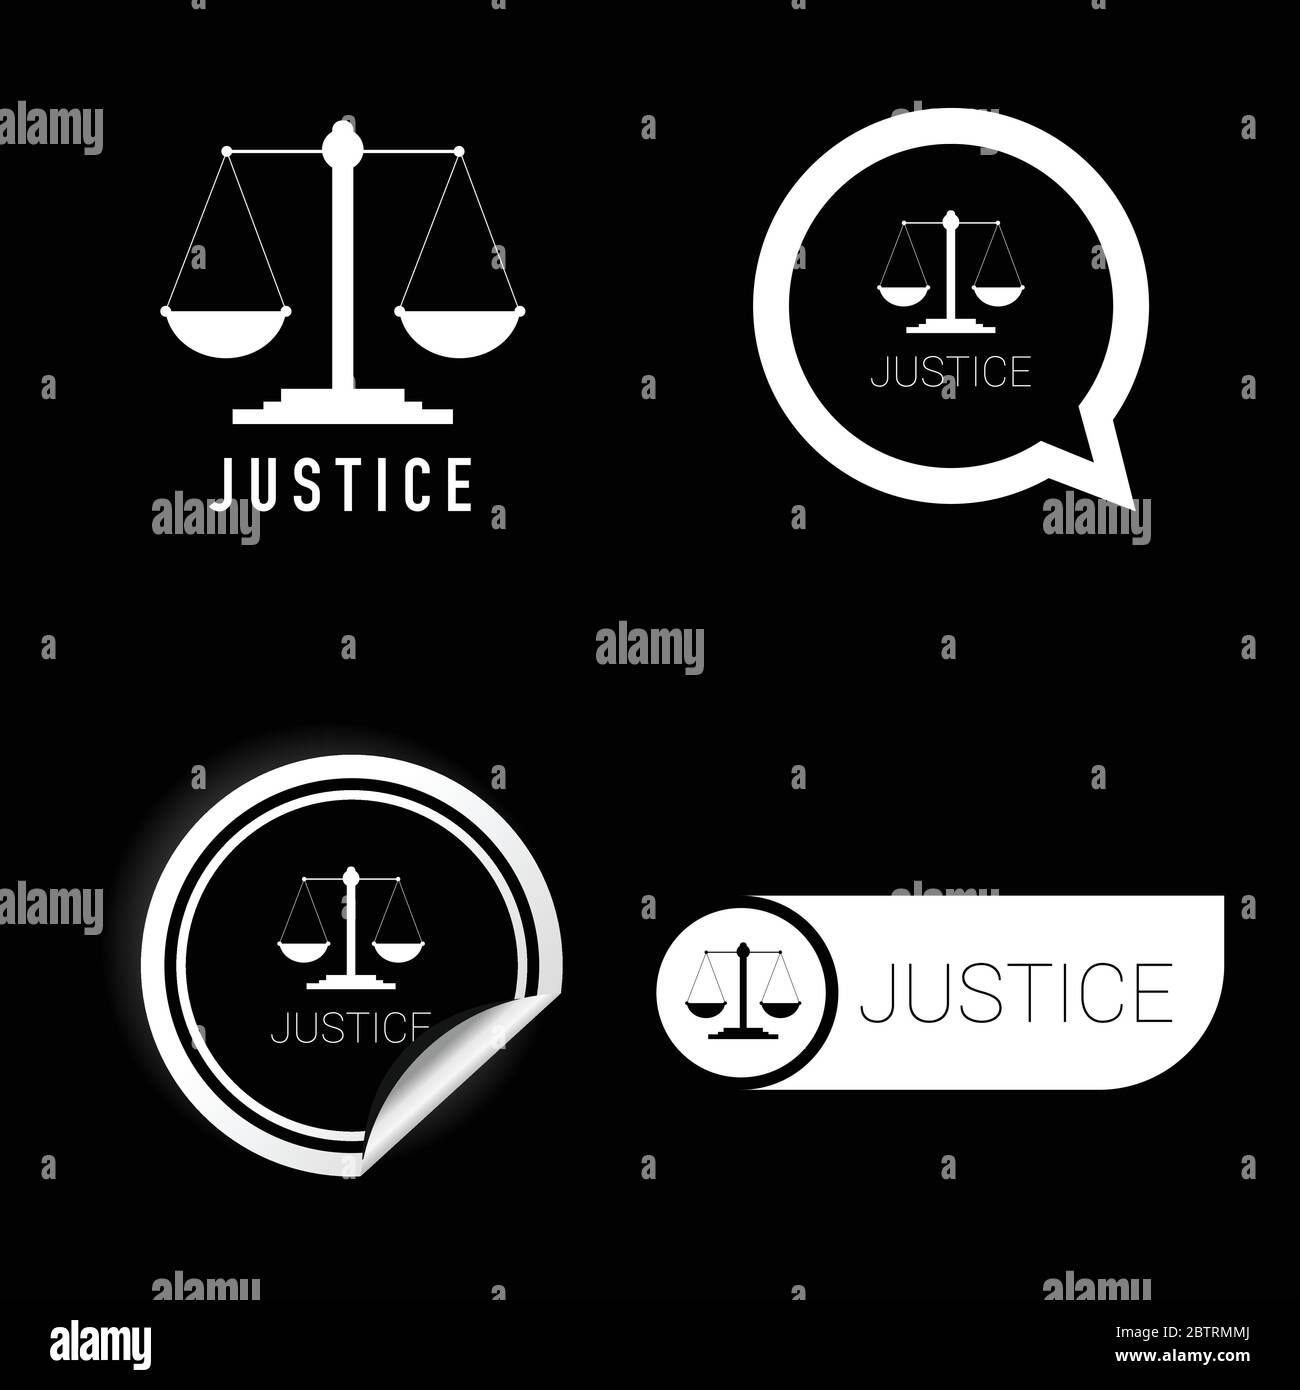 justice vector icon black and white color Stock Vector